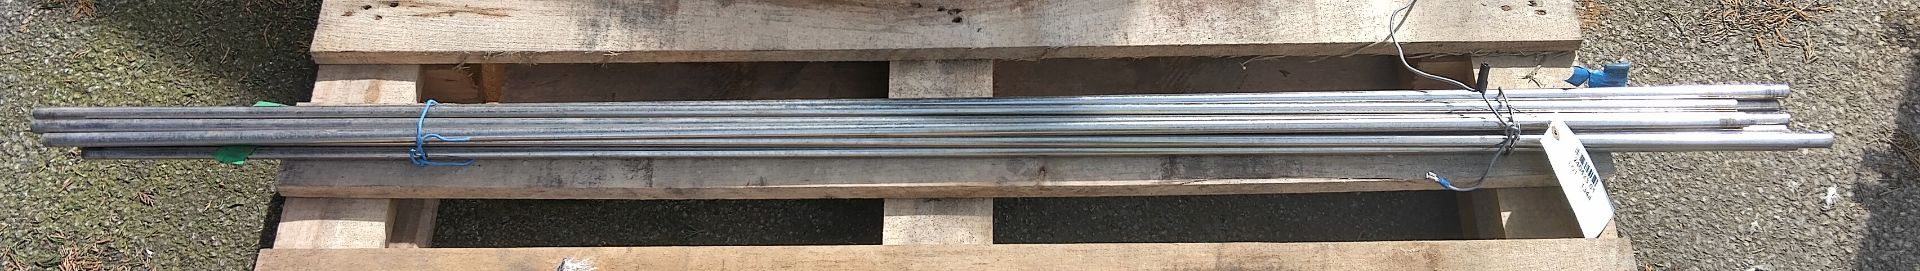 9x stainless steel bars - L 1540 x D 10mm